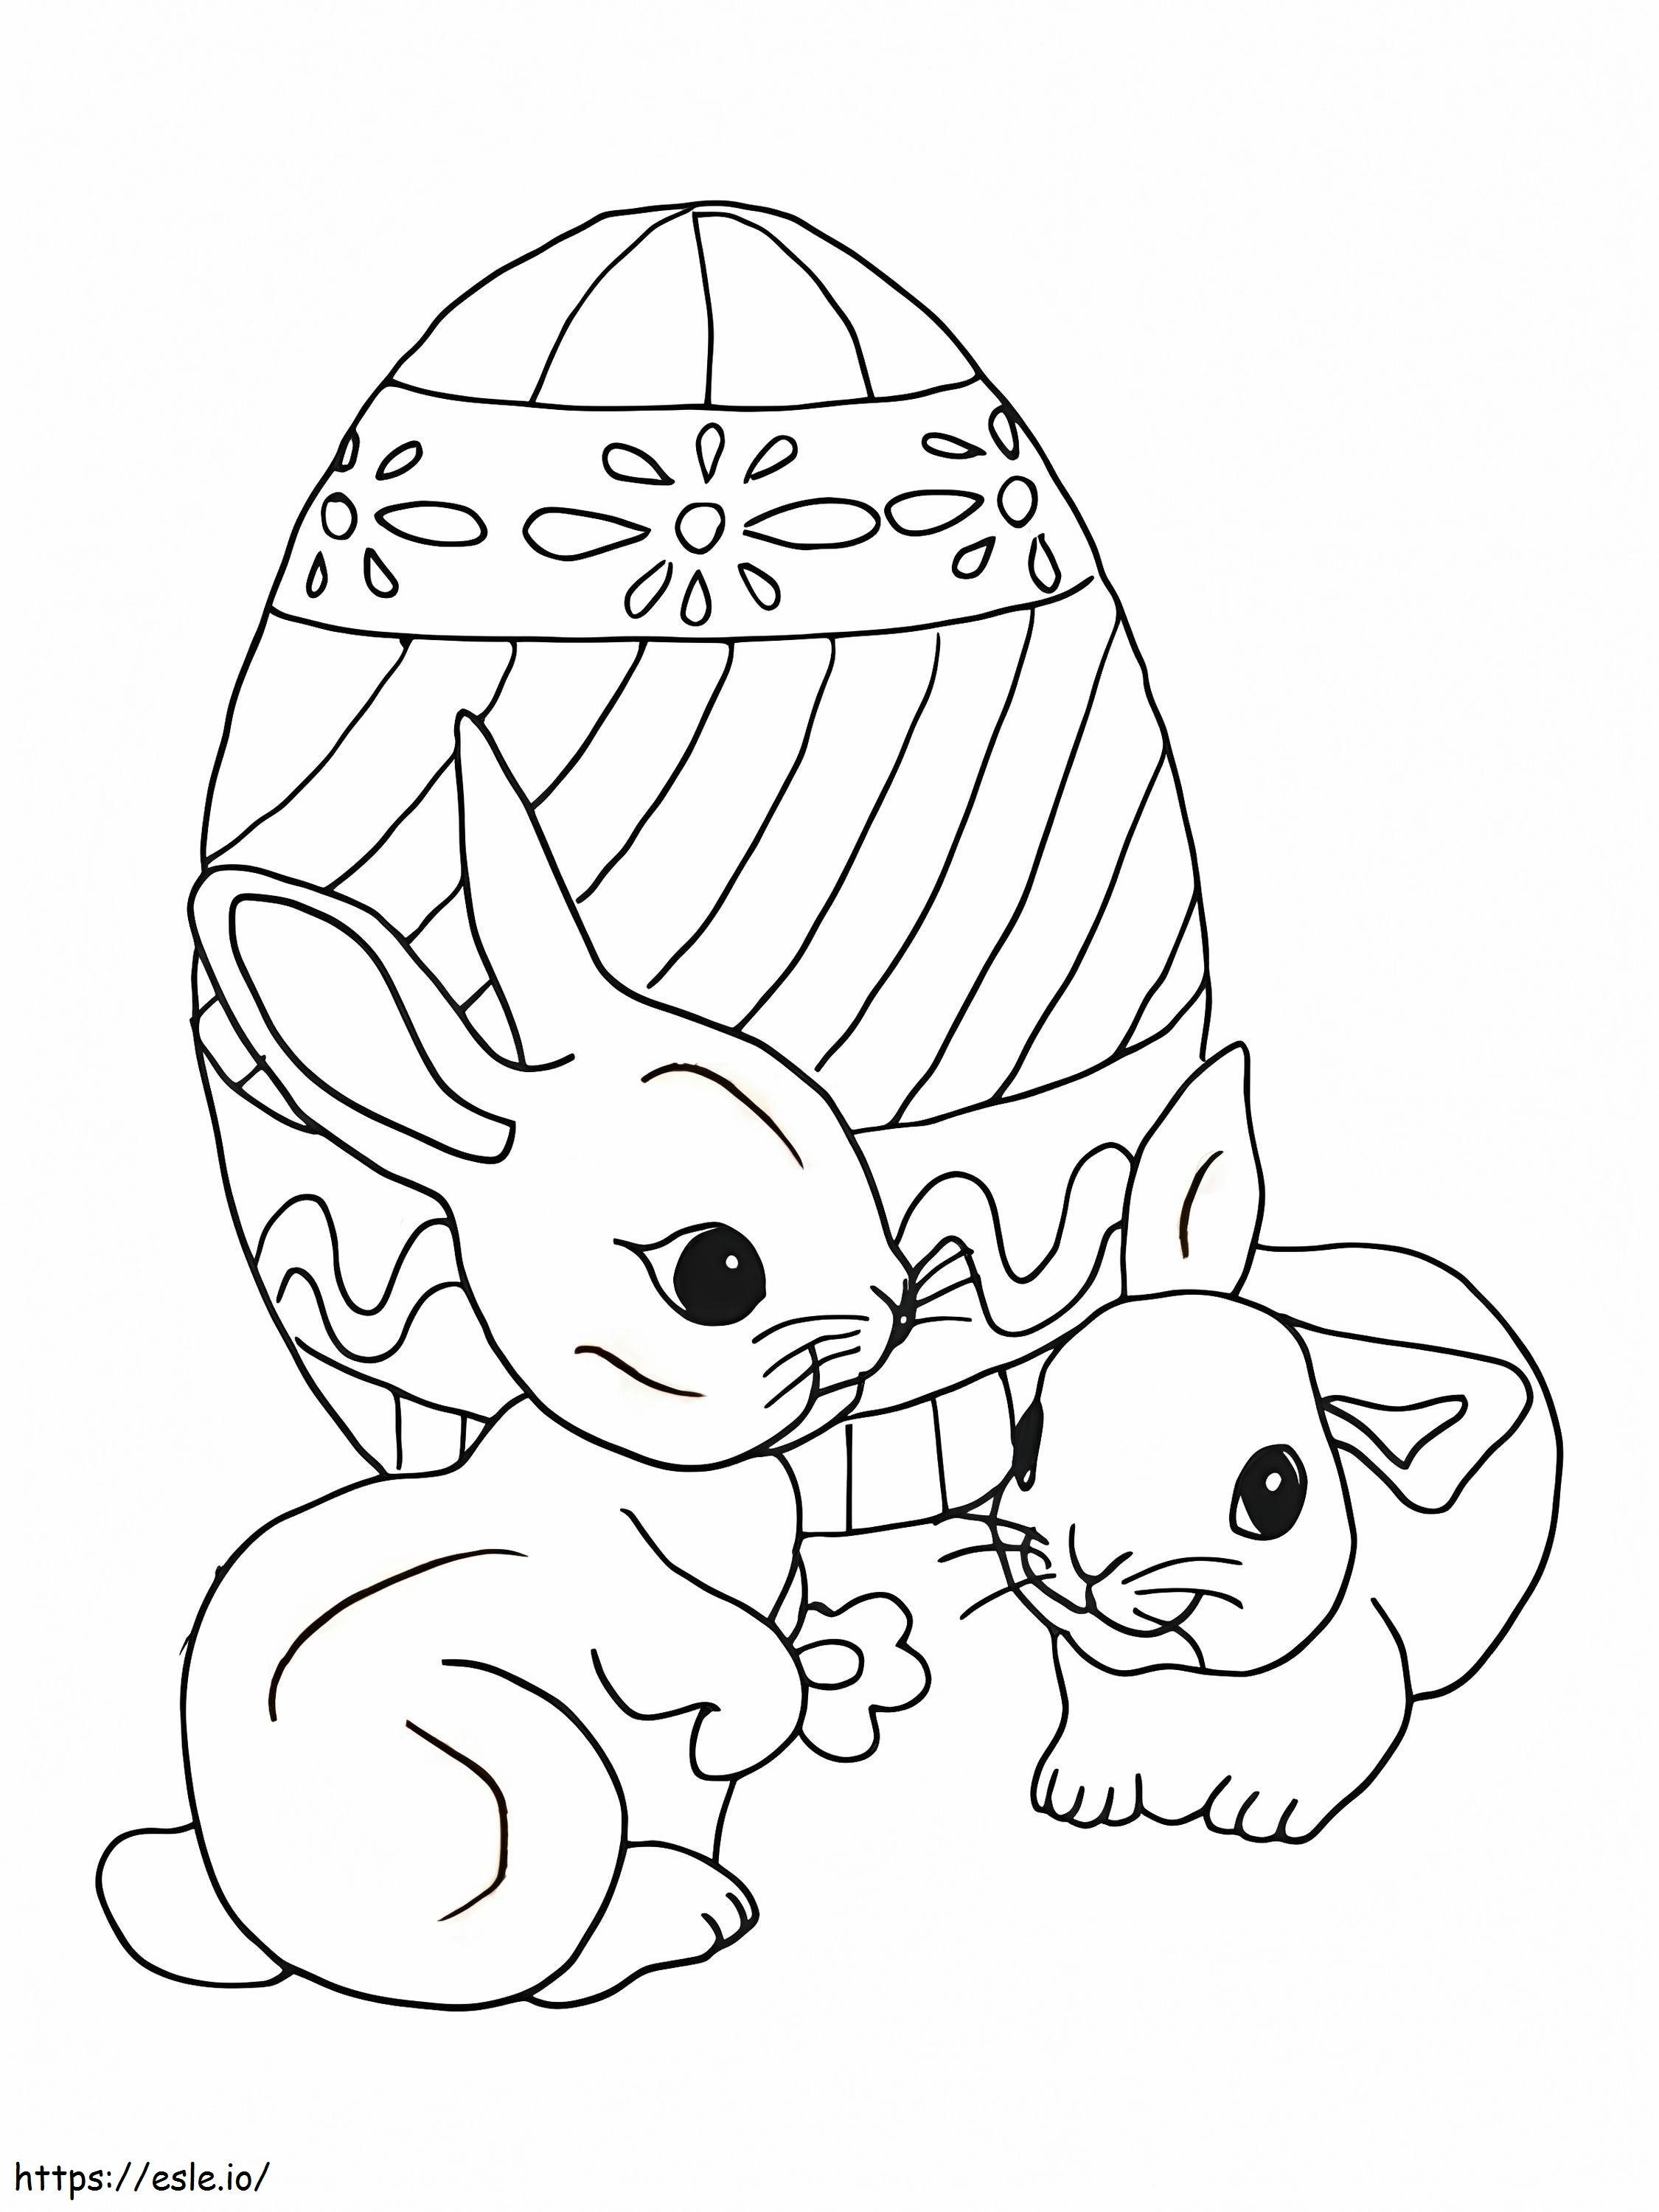 Two Easter Bunnies And Egg coloring page